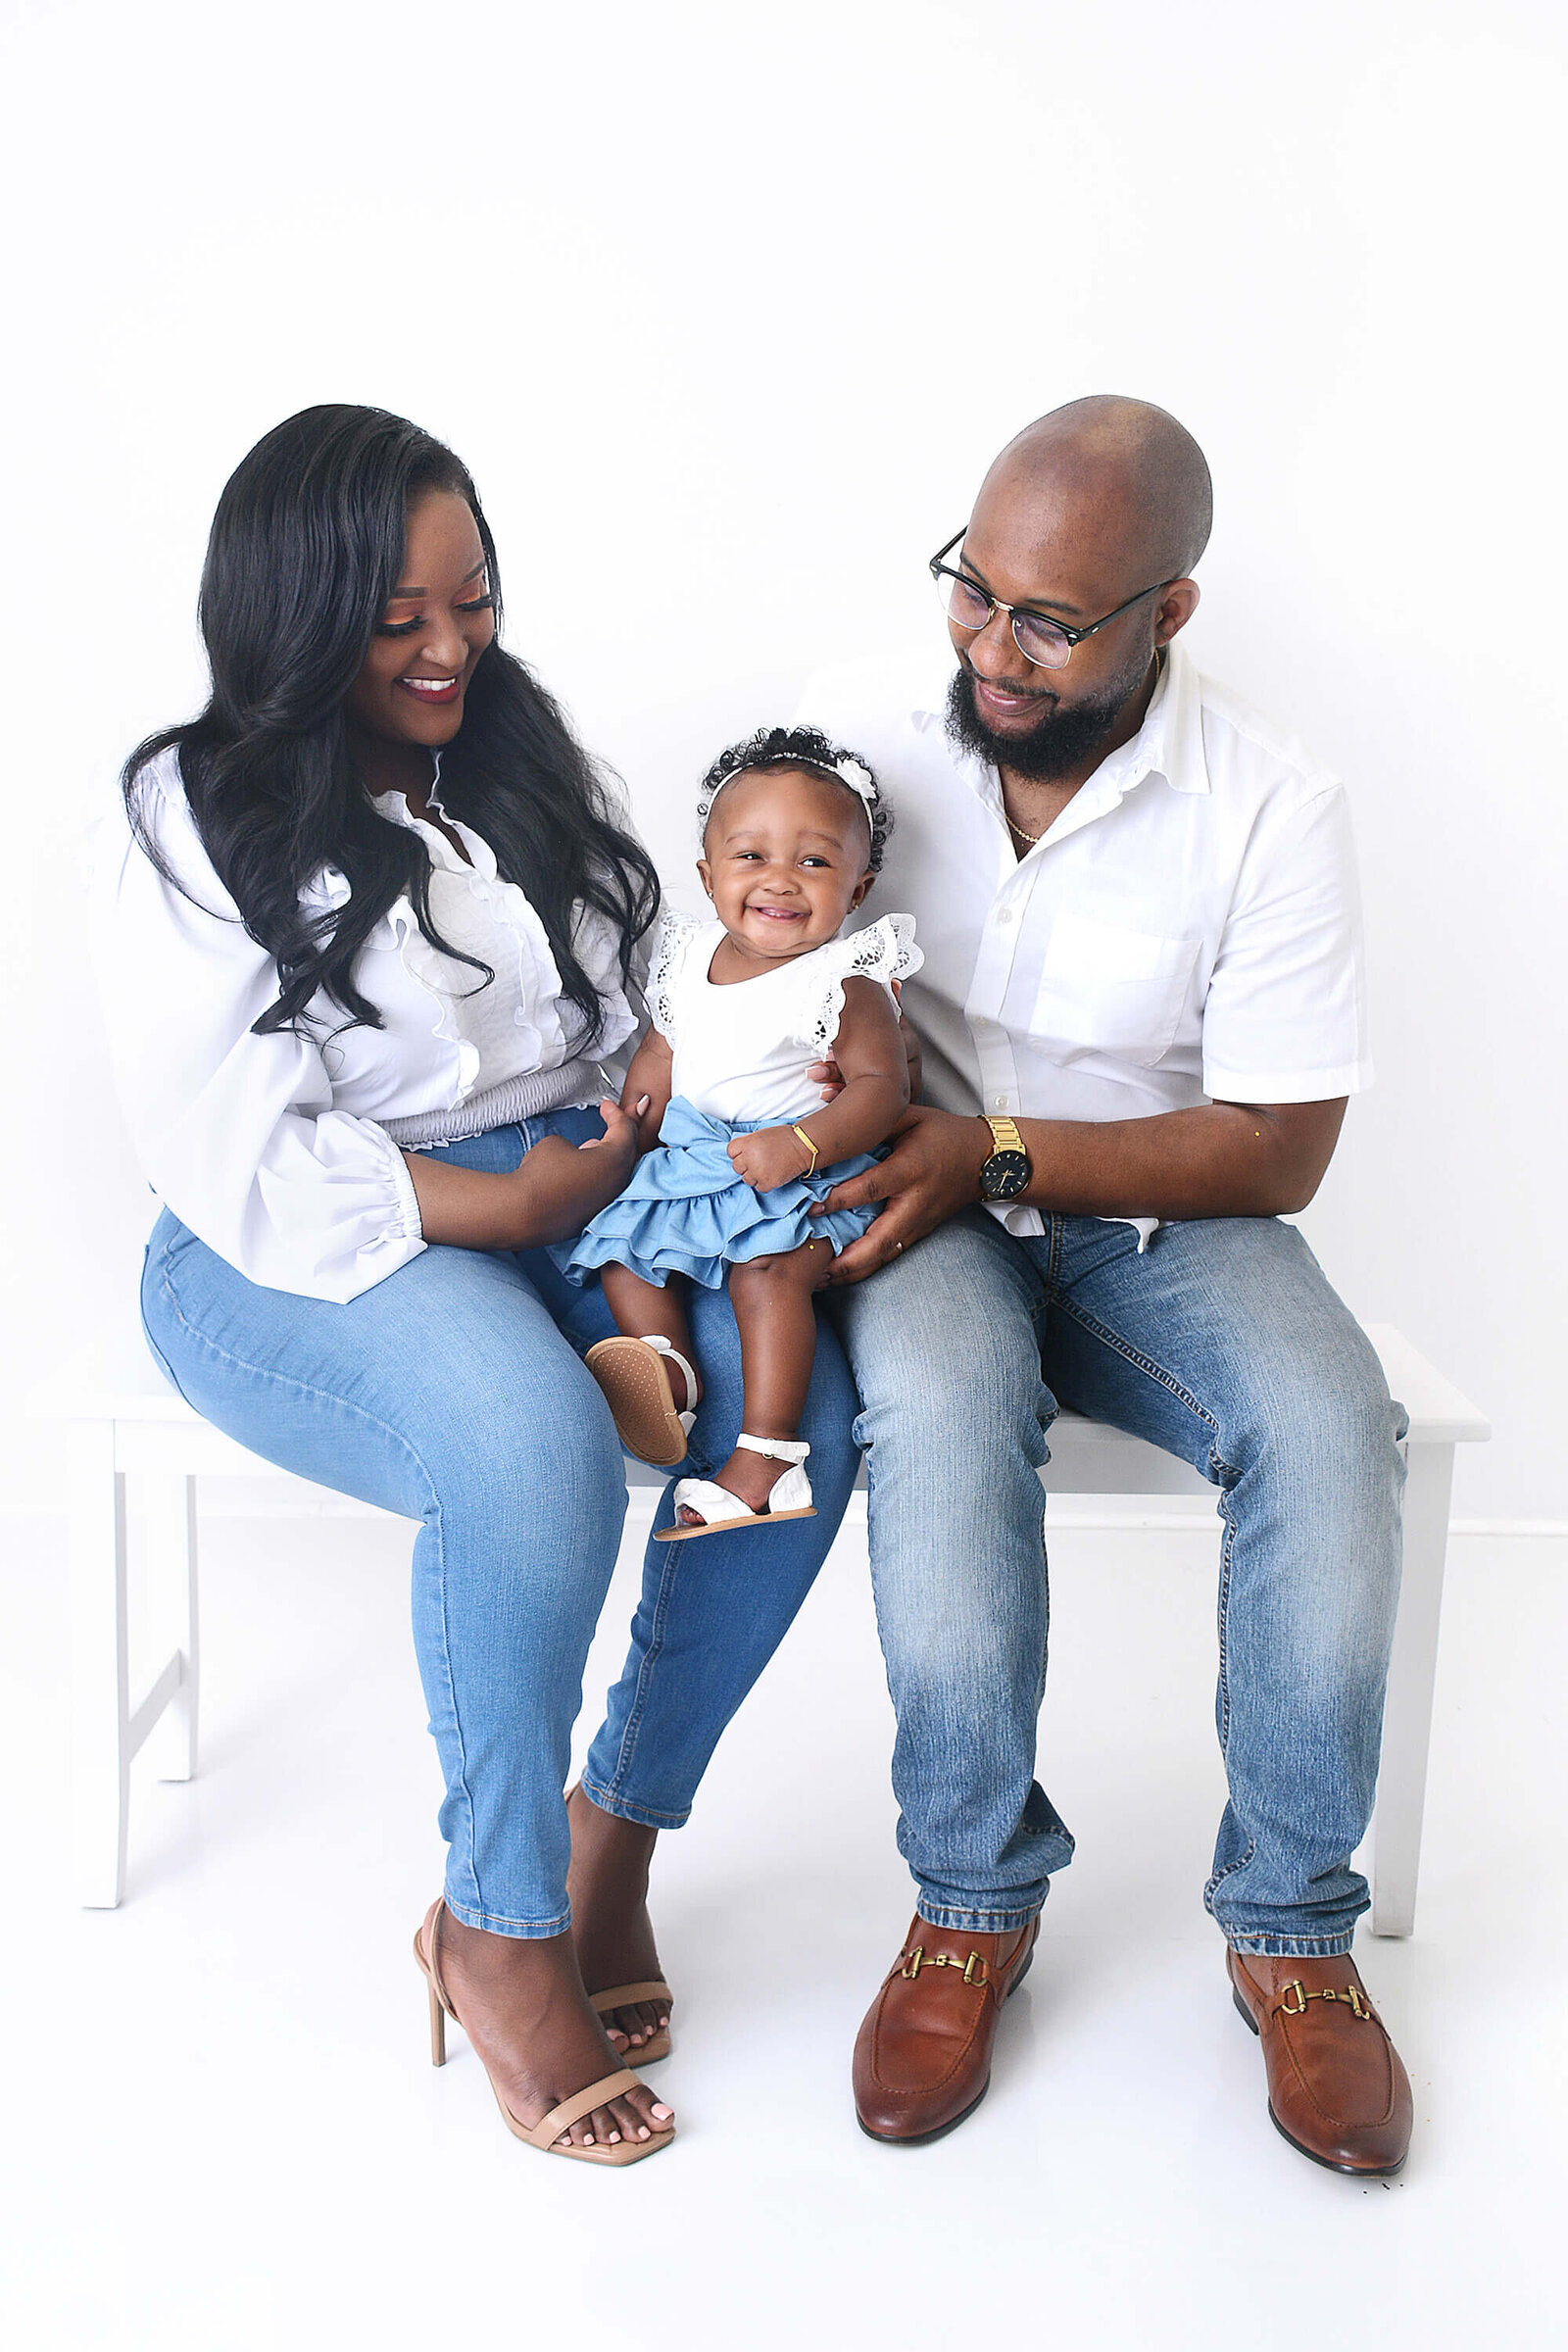 family smiles at their baby at their photoshoot